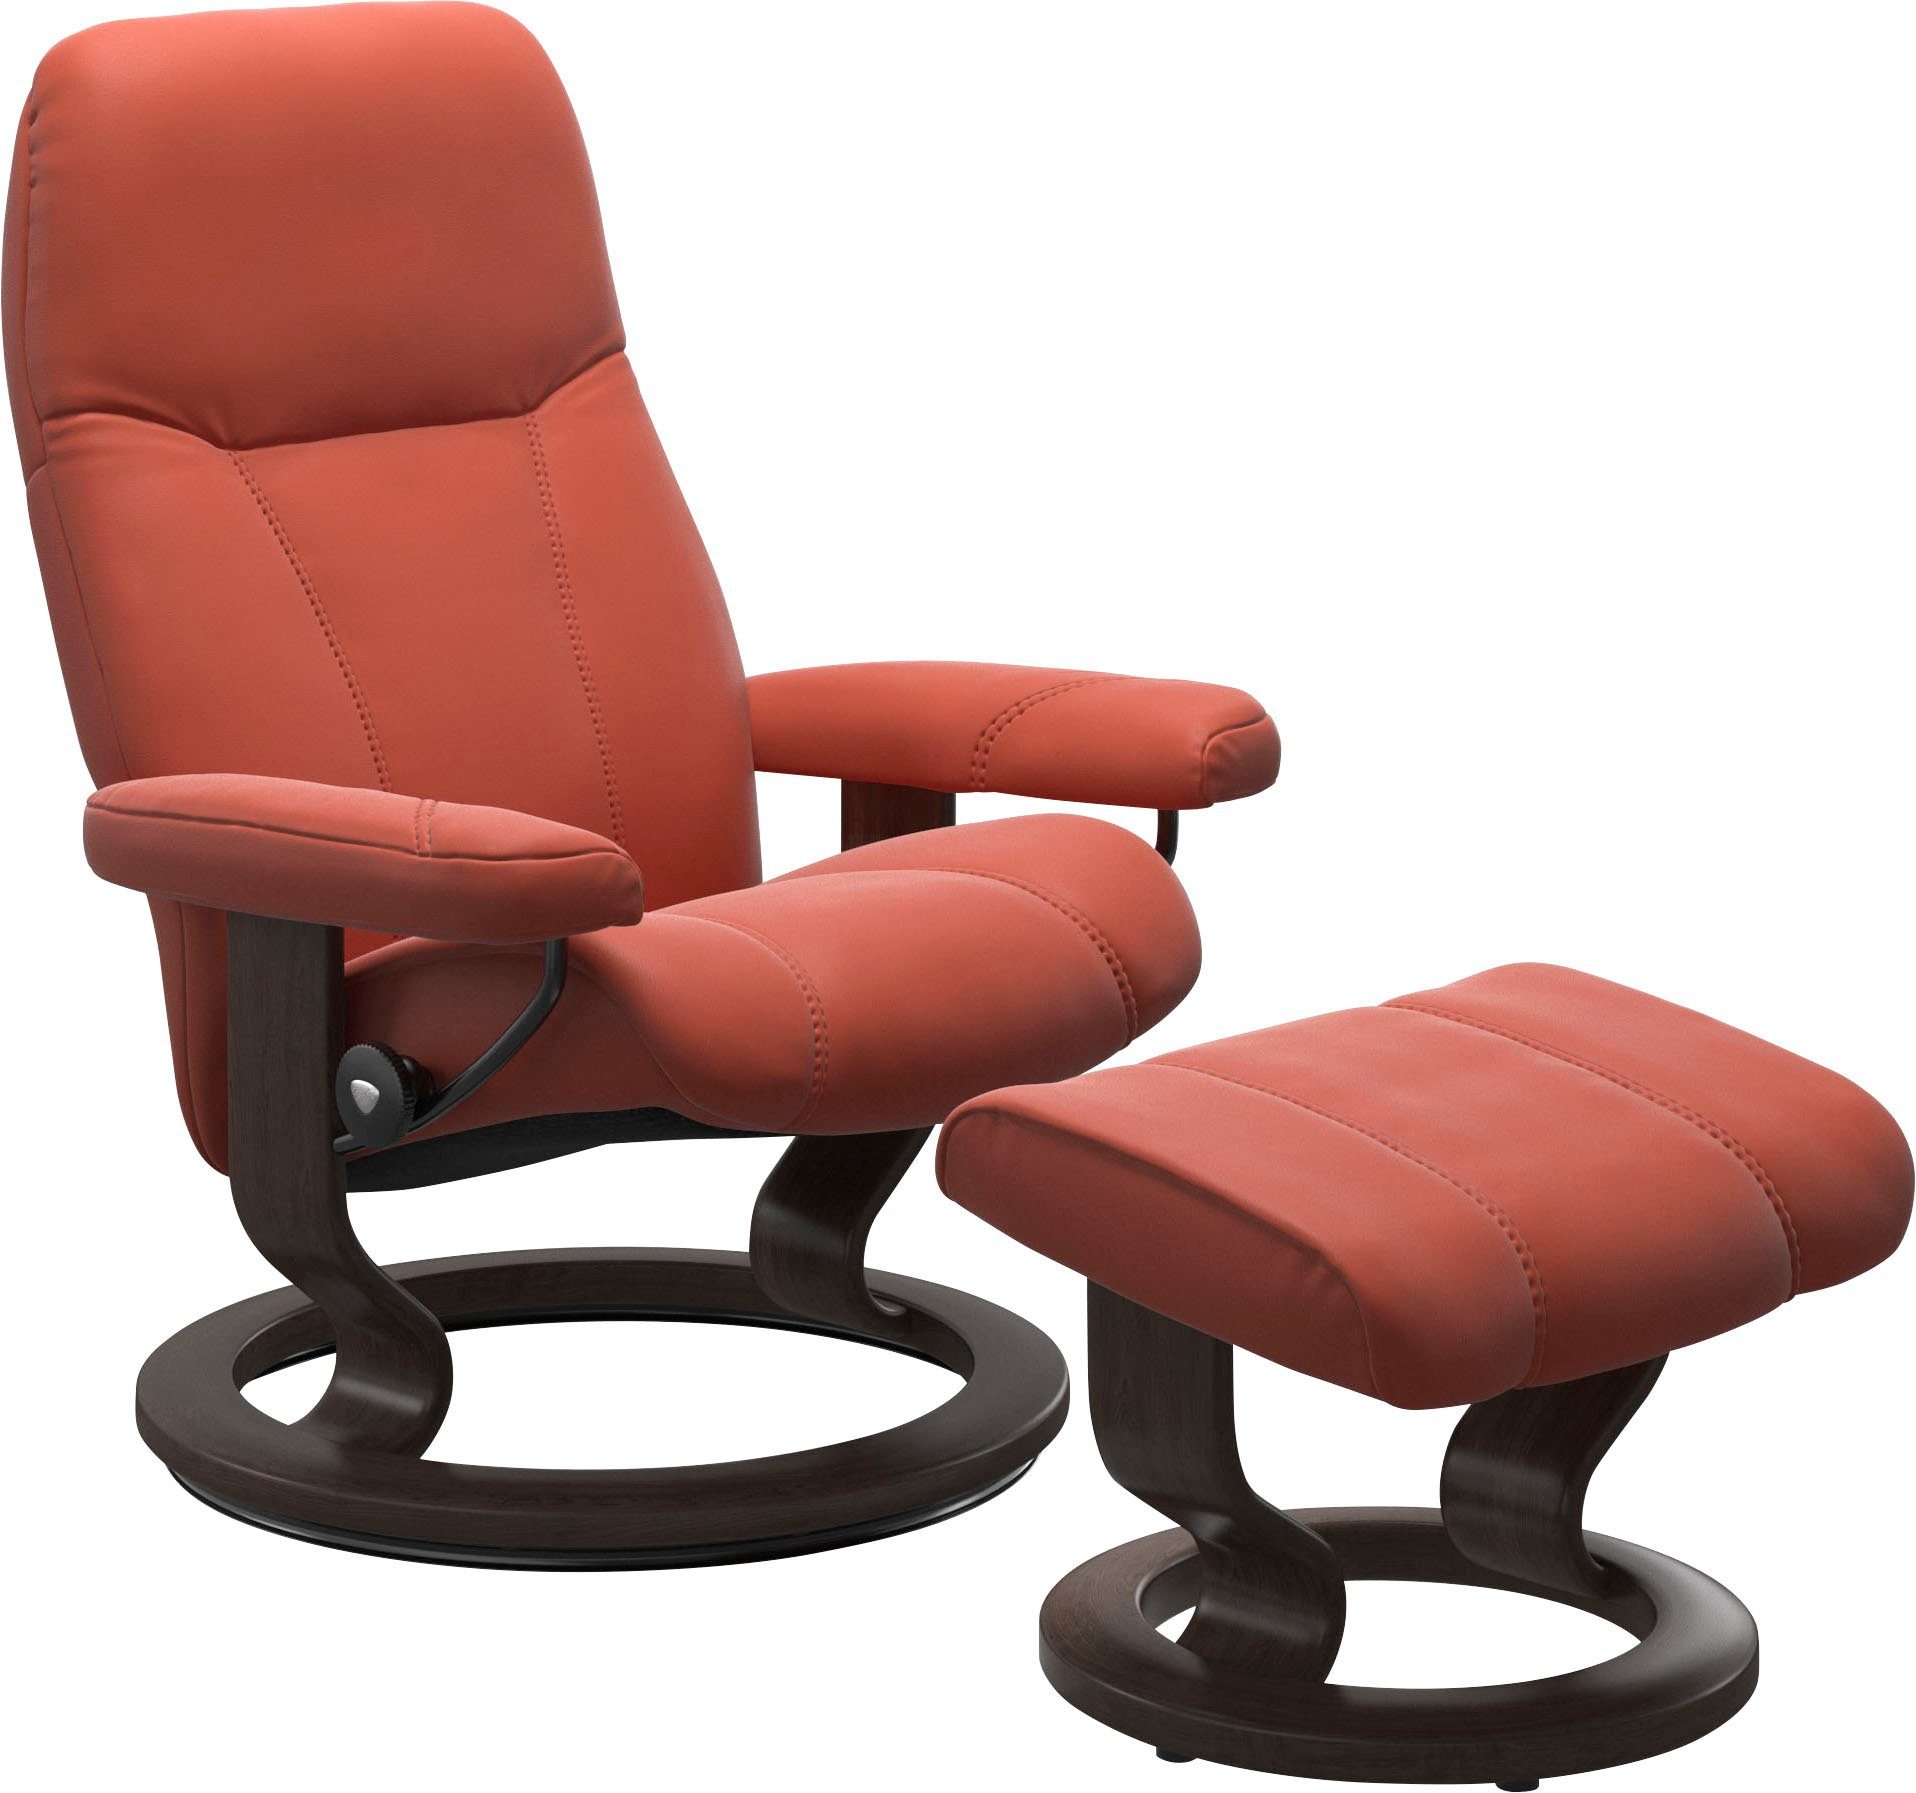 Stressless® Relaxsessel Consul, mit Classic Base, Größe L, Gestell Wenge